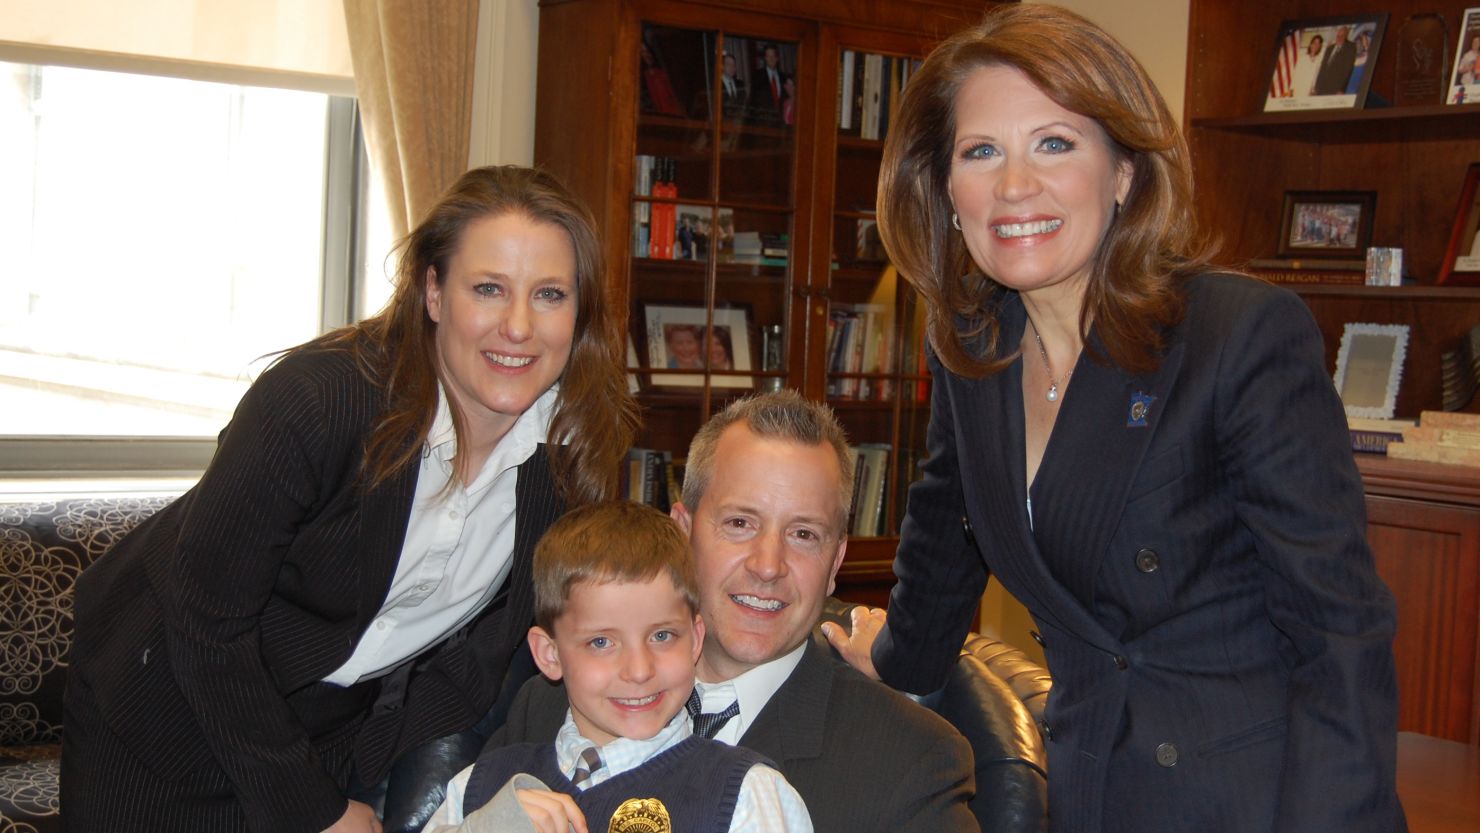 Jack, with his family and Rep. Michele Bachmann.  